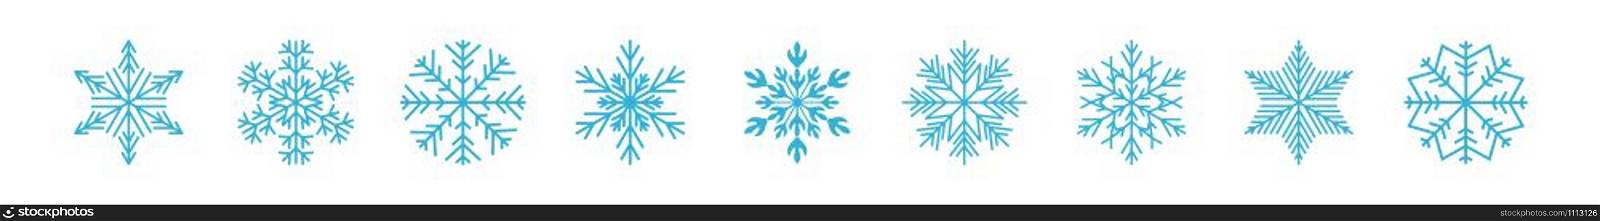 Icy snowflakes winter decoration collection vector illustration. Set of flat blue line snowflake icons on white background for new year celebration design or winter season festive ormament decoration. Blue icy snowflakes winter decoration collection